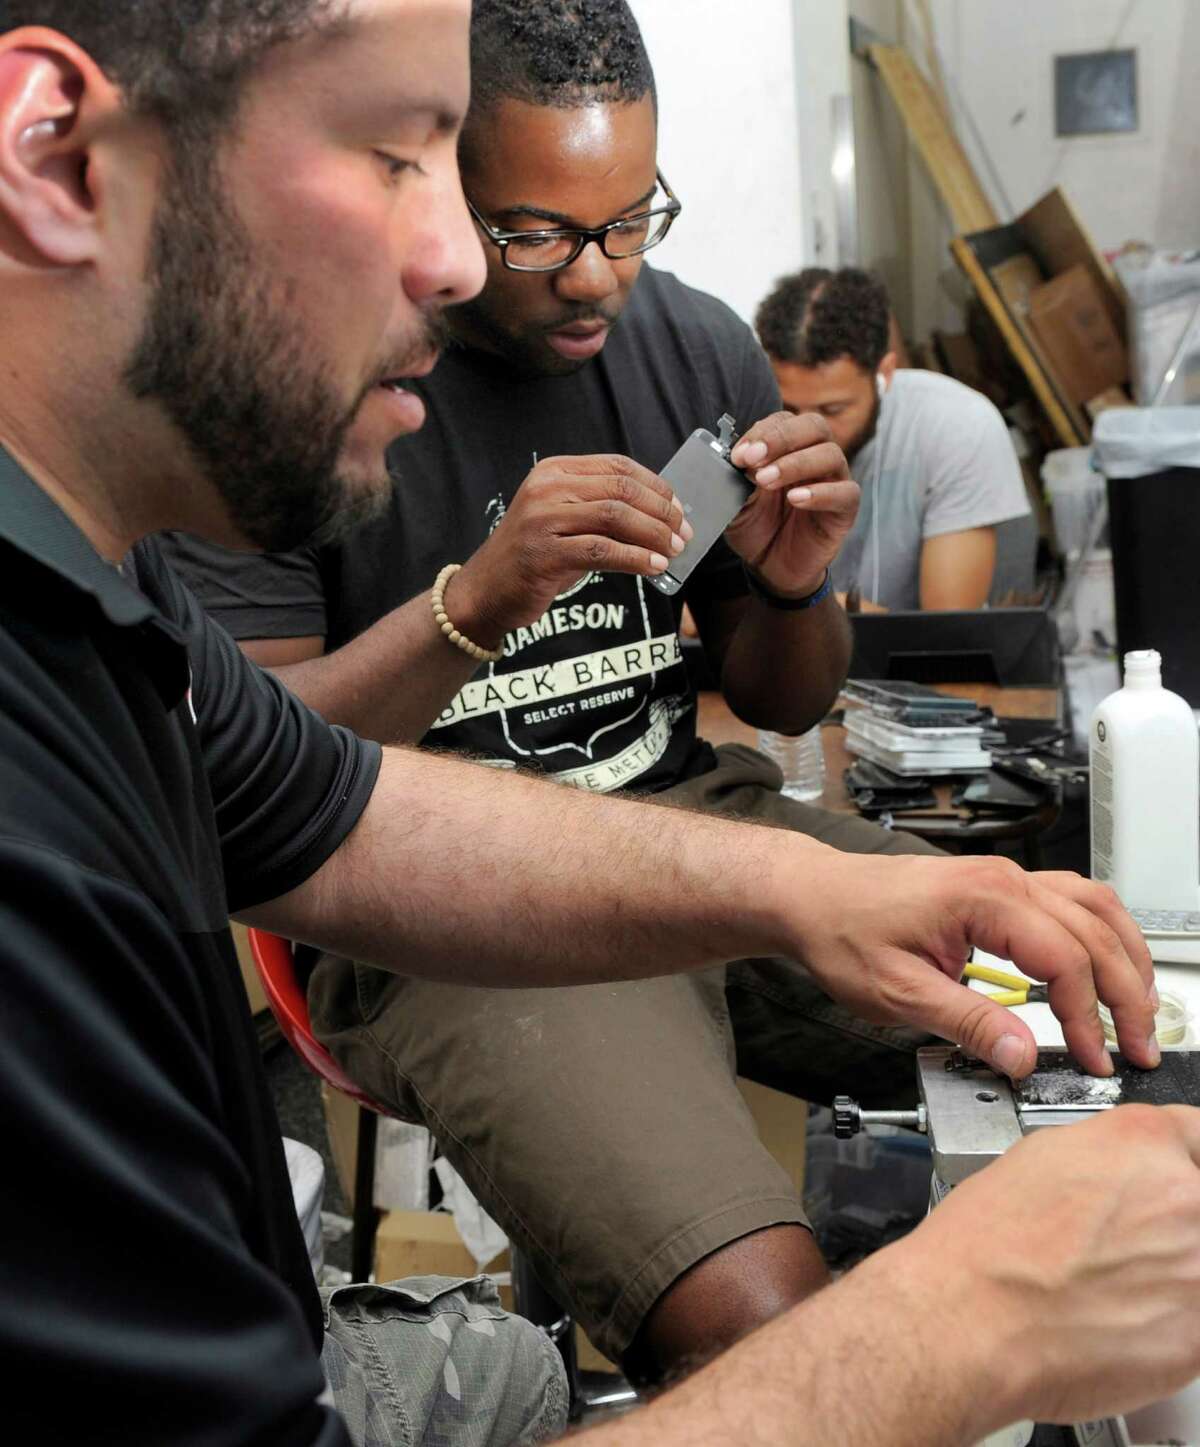 Chris Rice, left, and Dane Jackson make iPhone screens at Mobile Resue on Federal Road in Danbury Tuesday, Sept. 9, 2015.